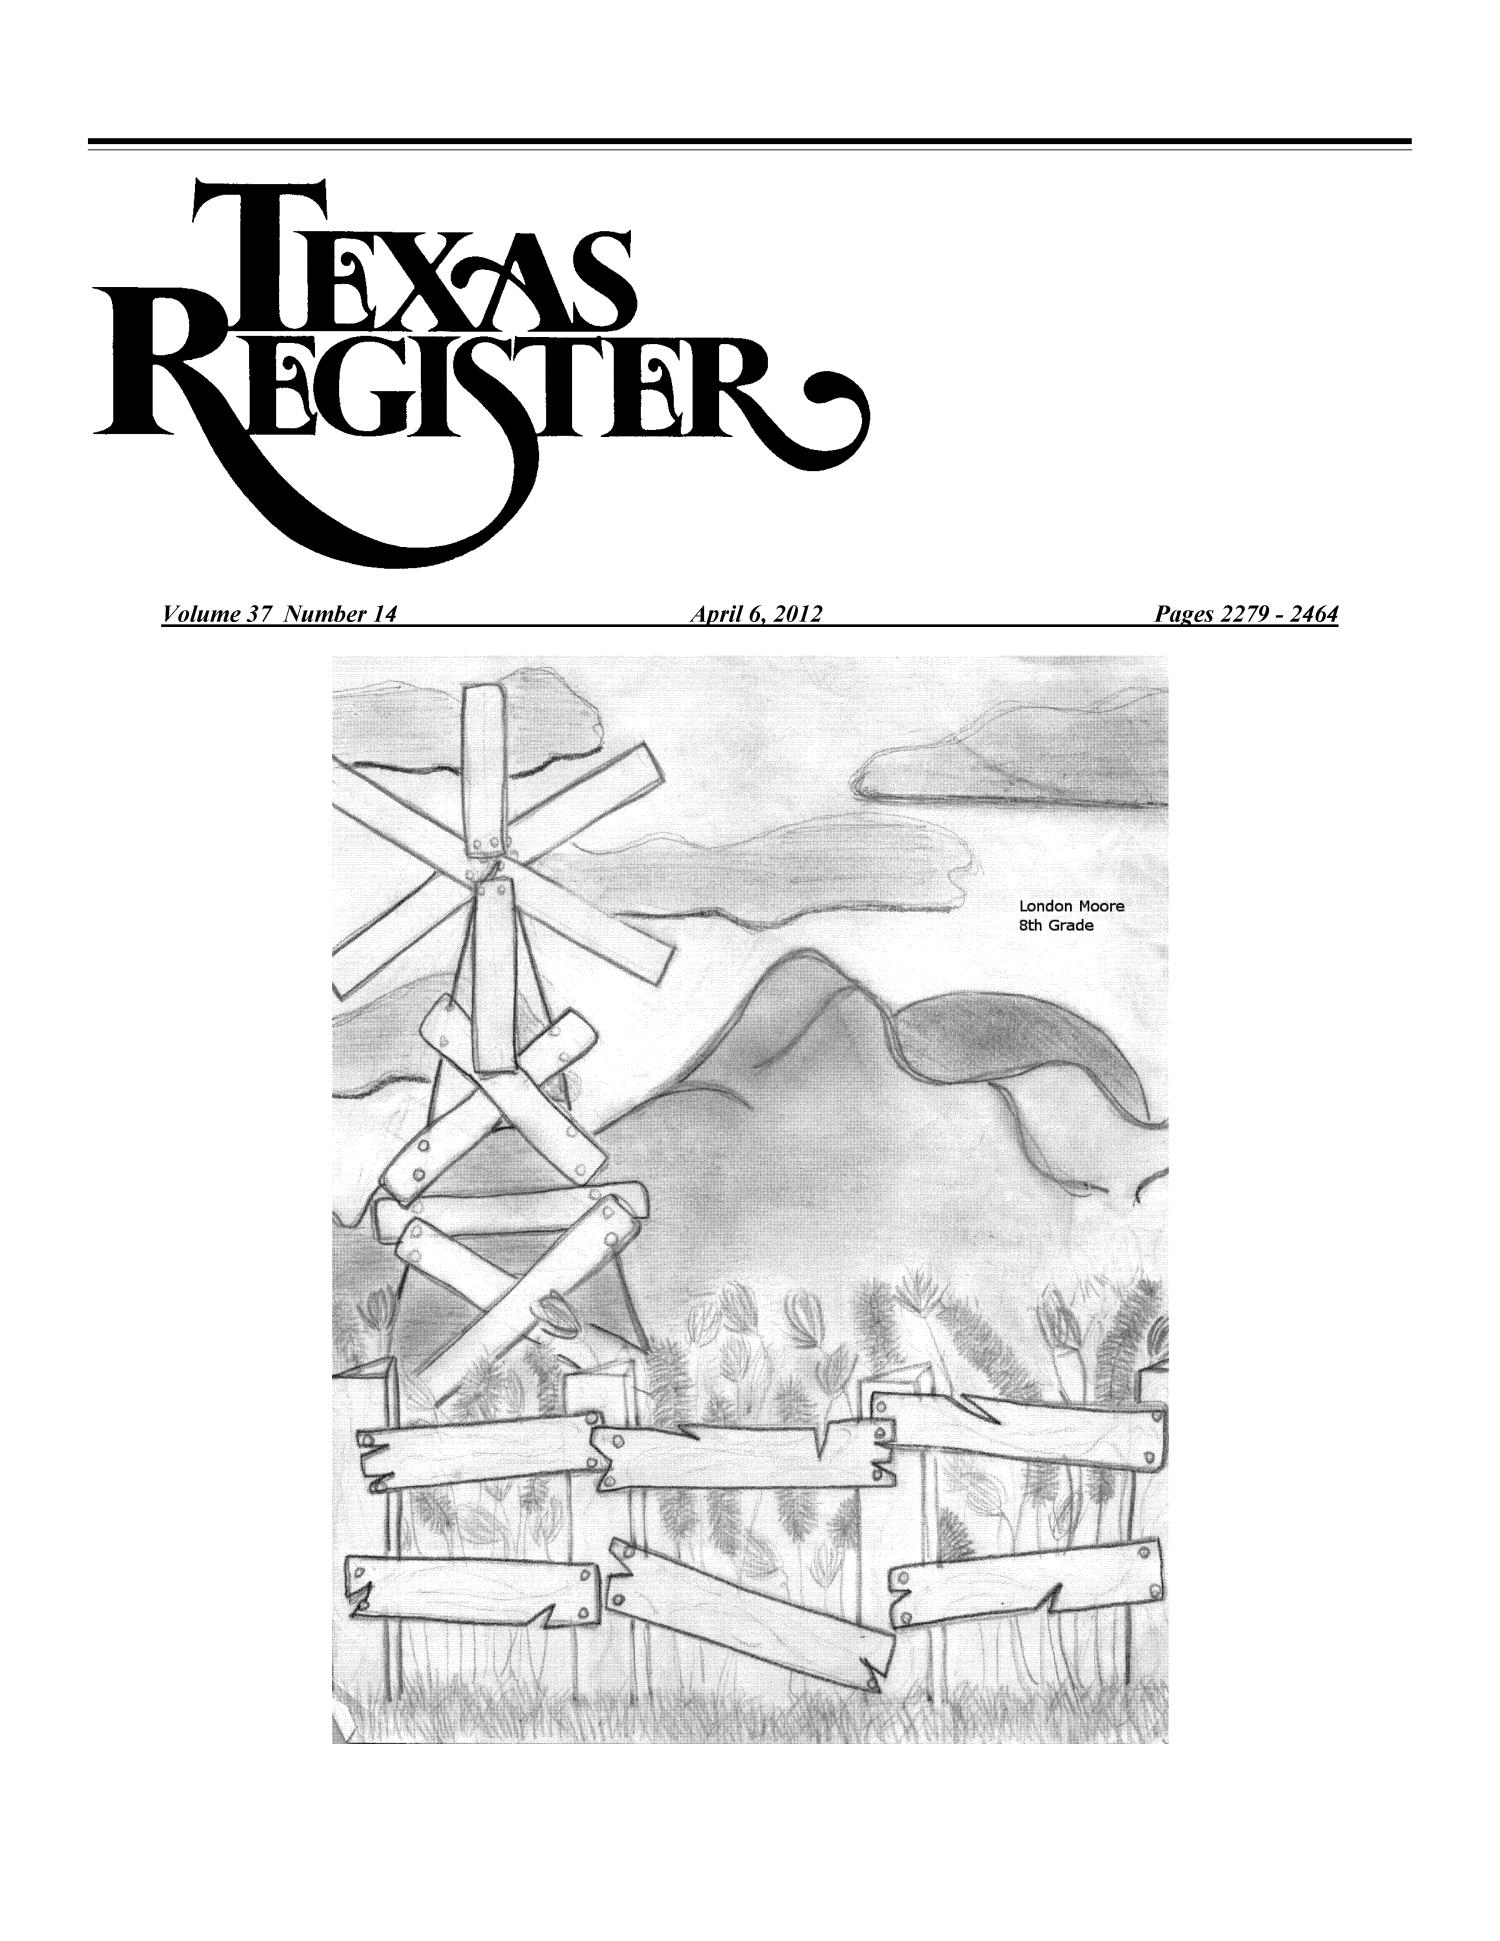 Texas Register, Volume 37, Number 14, Pages 2279-2464, April 6, 2012
                                                
                                                    Title Page
                                                